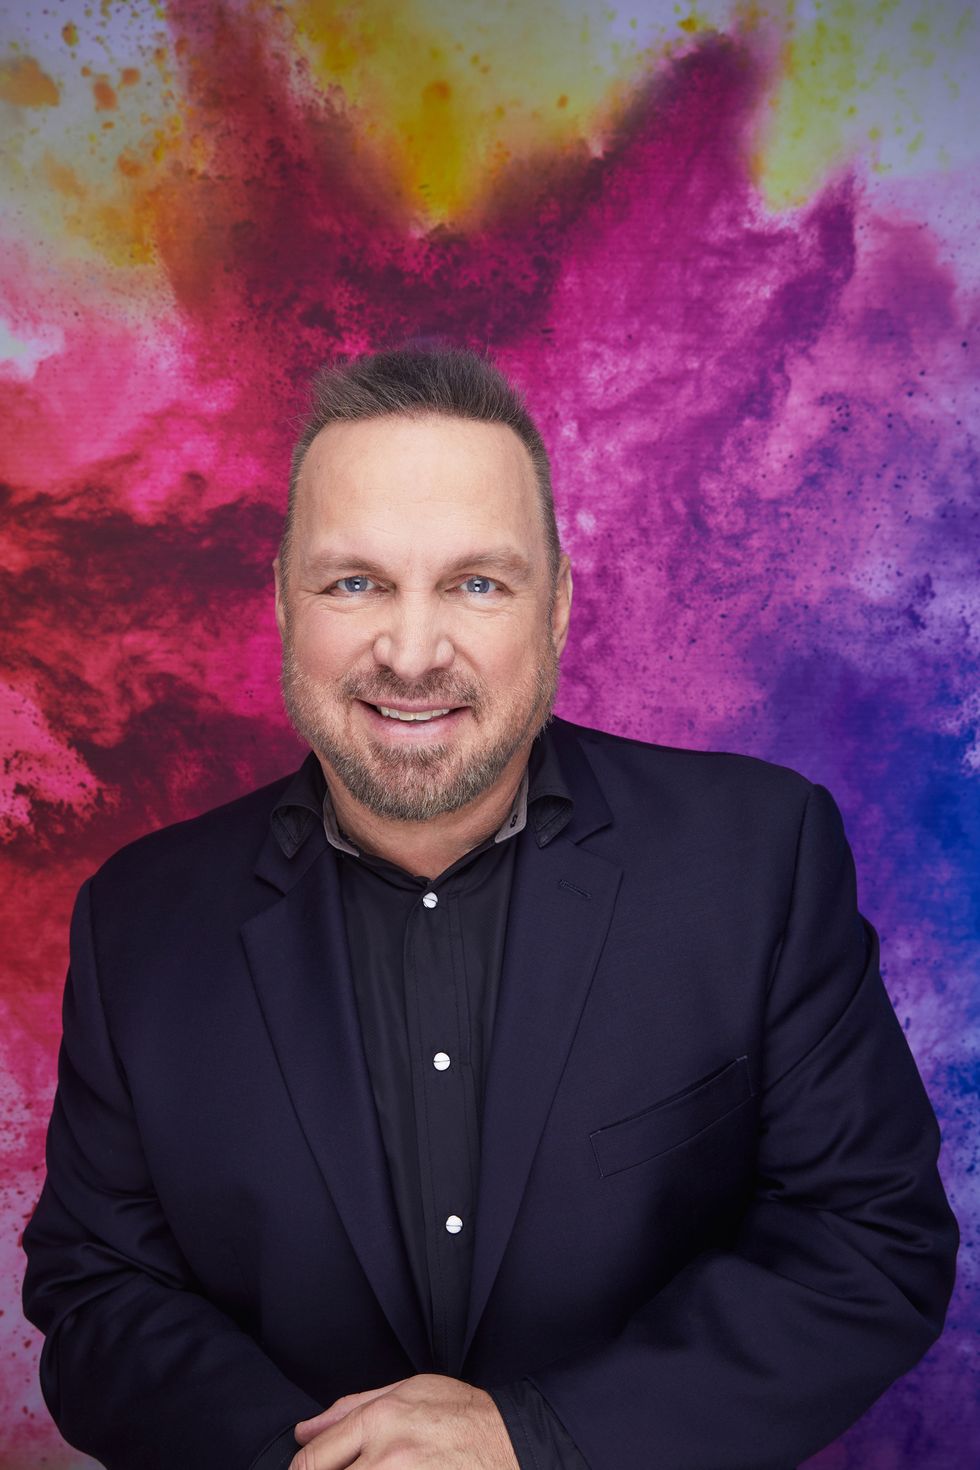 garth brooks posing with his hands on his knee and smiling for a promotional picture